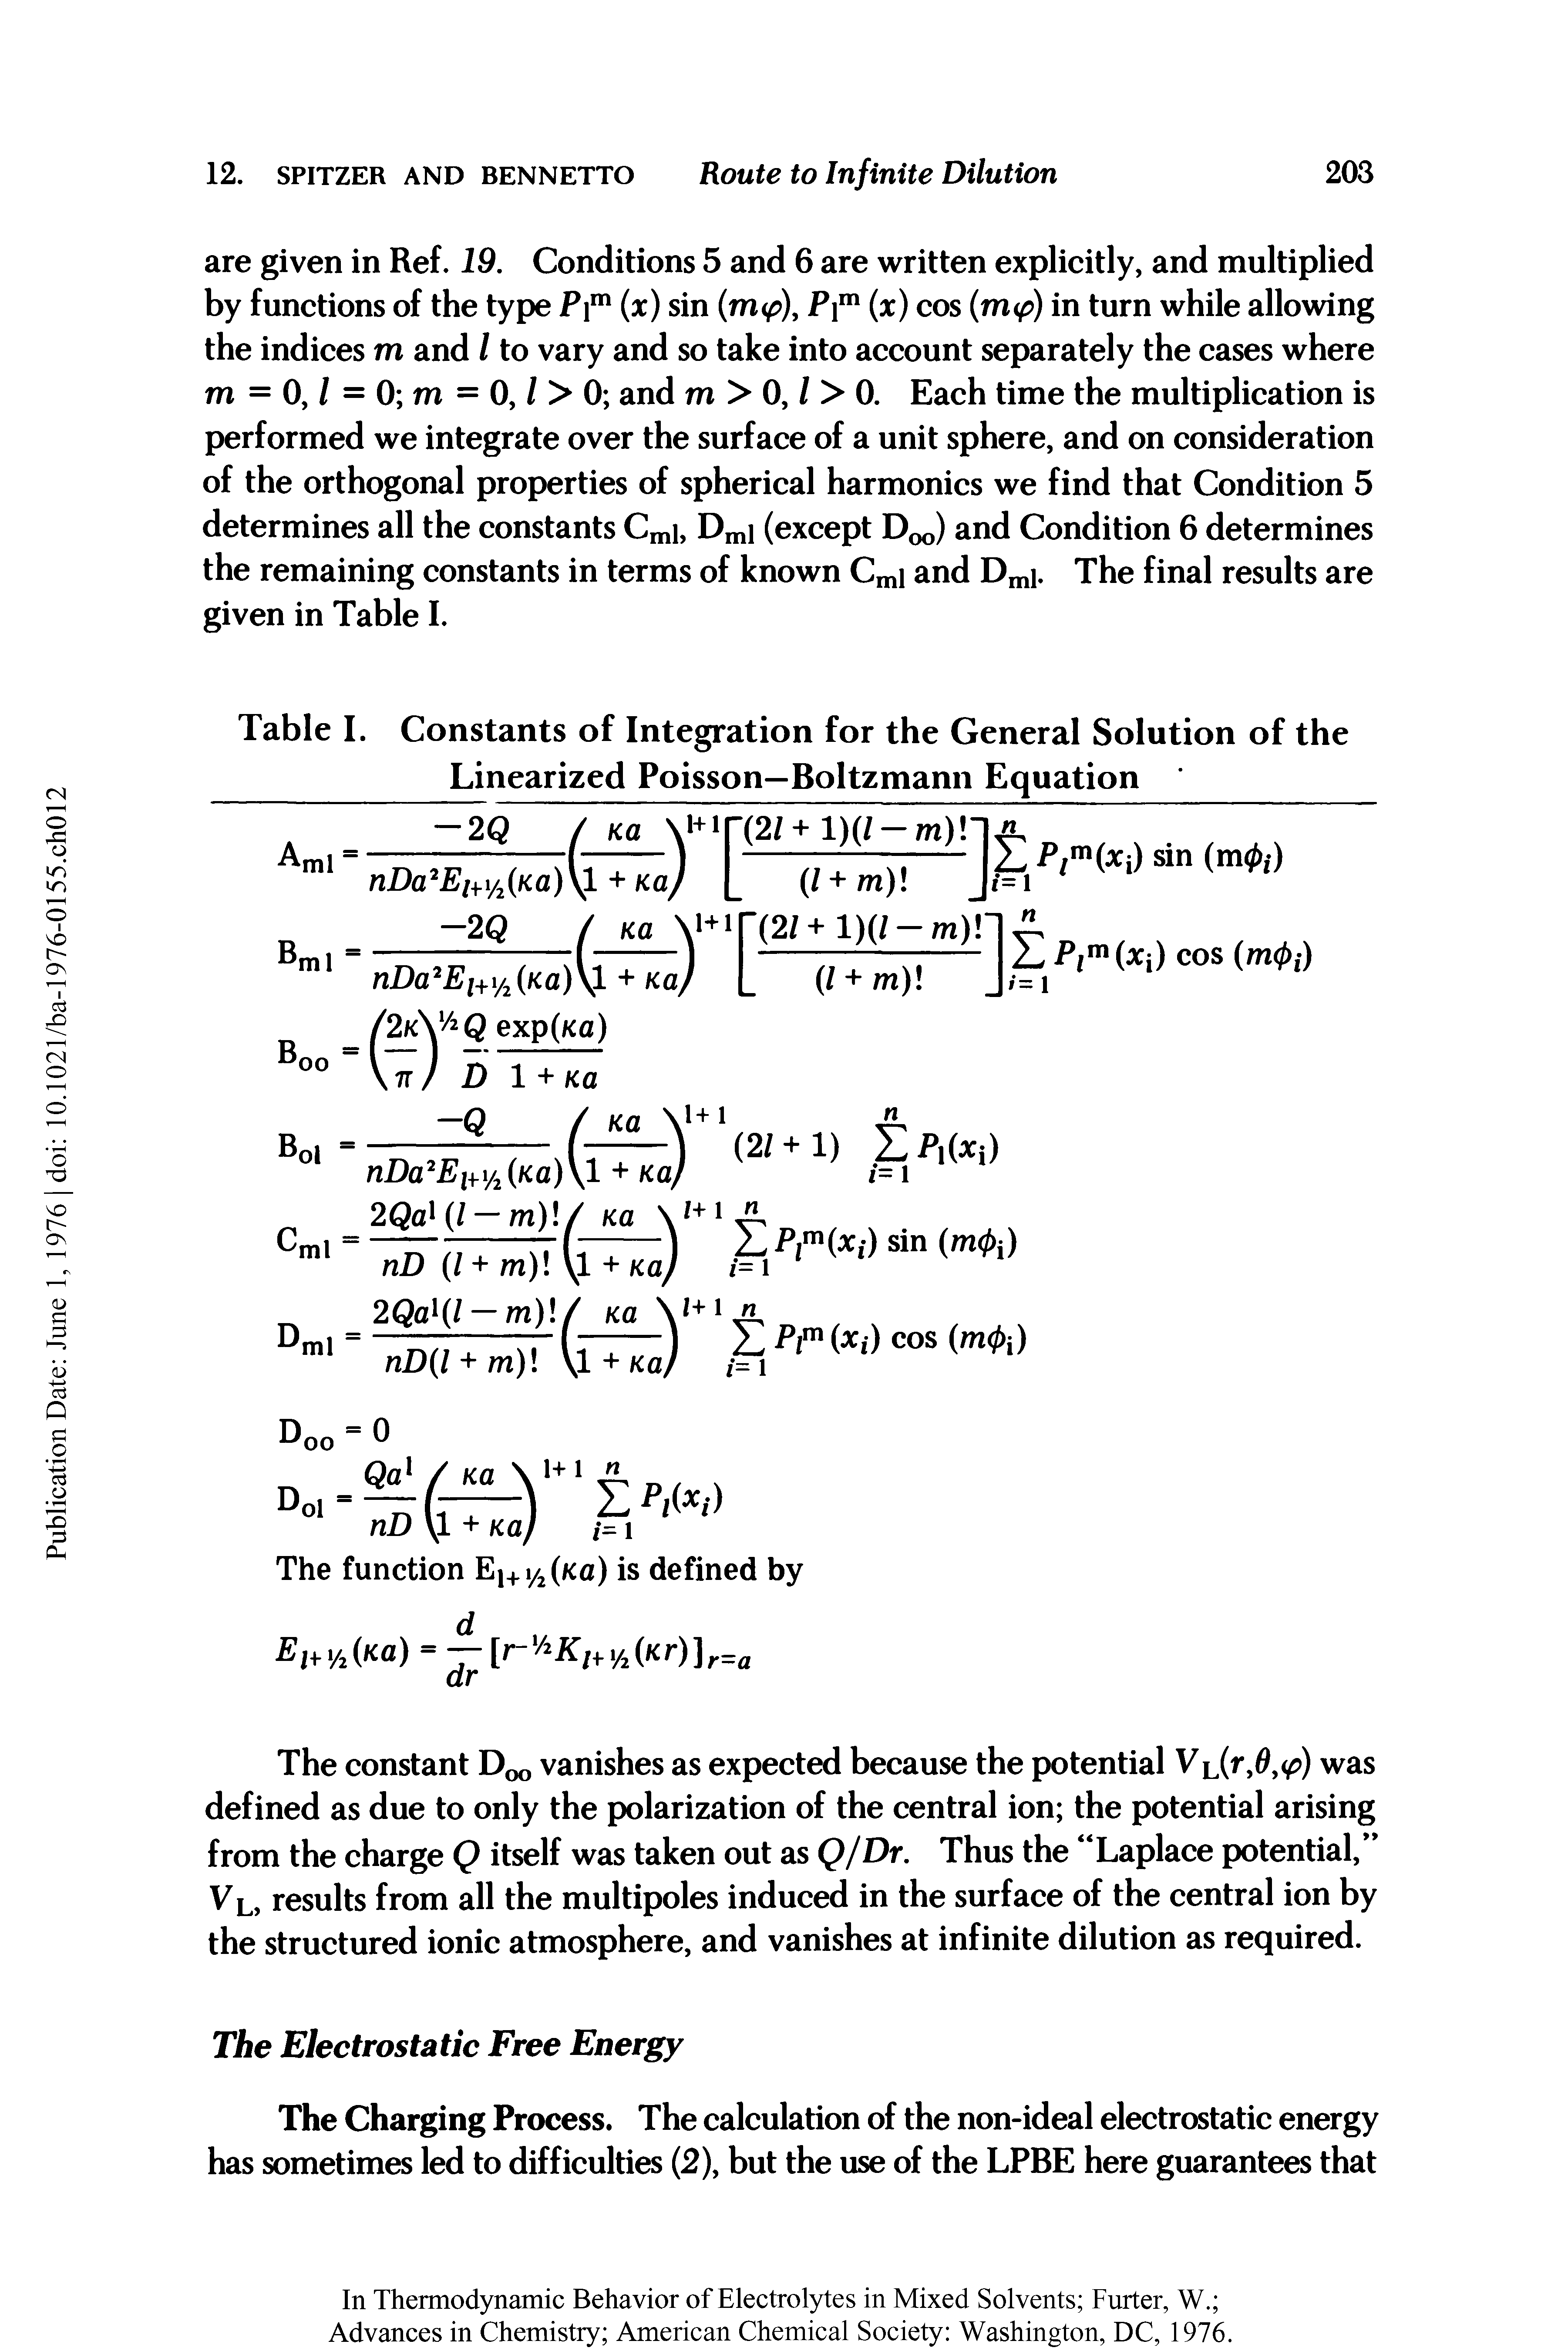 Table I. Constants of Integration for the General Solution of the Linearized Poisson—Boltzmann Equation...